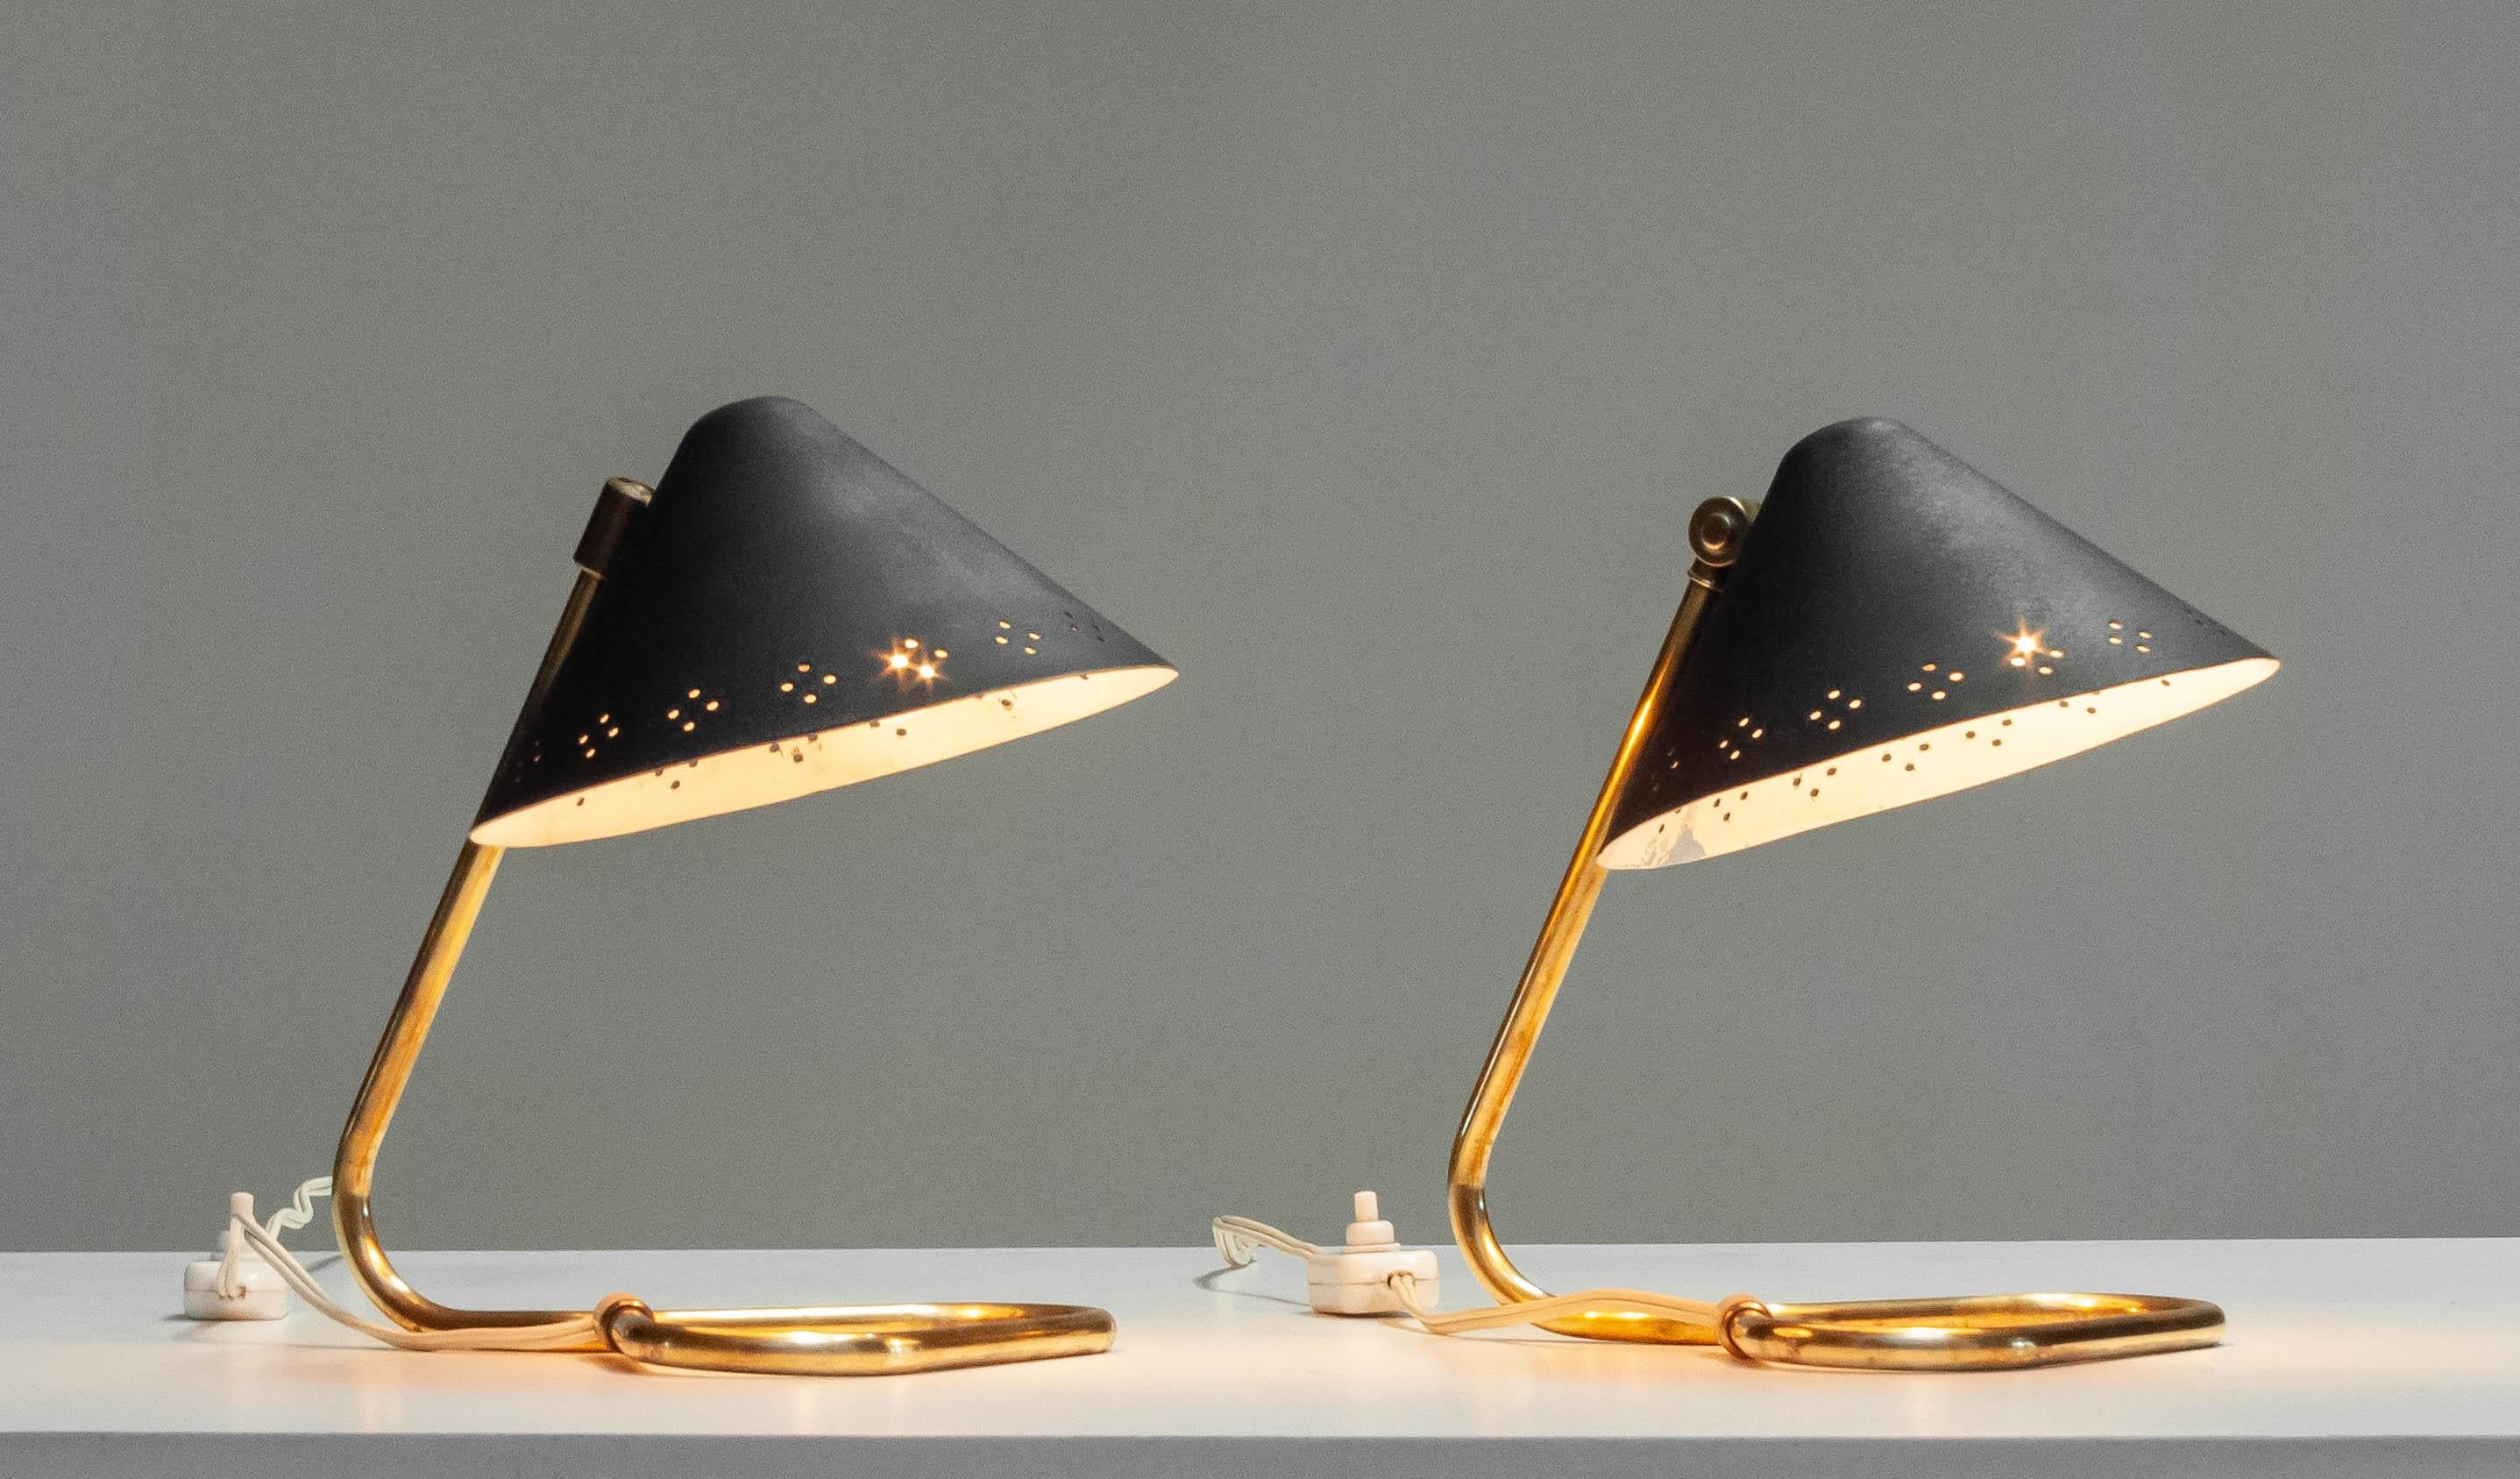 Pair of 1950s Erik Warna 'GK14' Black and Brass Perforated Shade Table Lamps. 
The shades are adjustable in a up or down position. Produced by Gnosjö Konstsmide Rydahls in Sweden in the 1950s.
Allover these table lamps are in good condition.